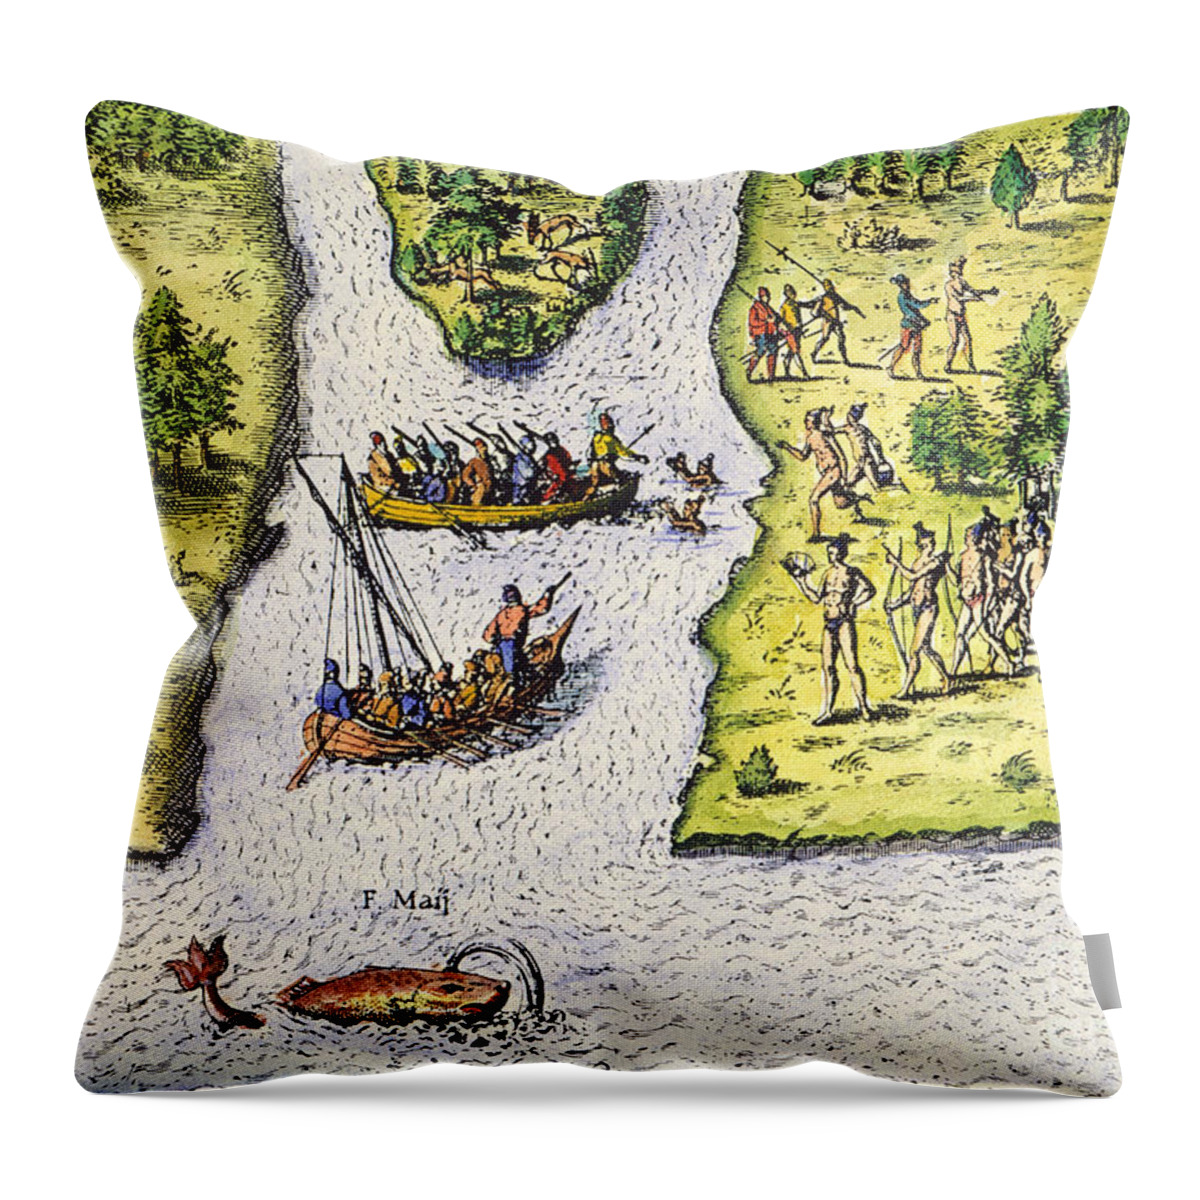 1562 Throw Pillow featuring the photograph Jean Ribault: Florida, 1562 by Granger